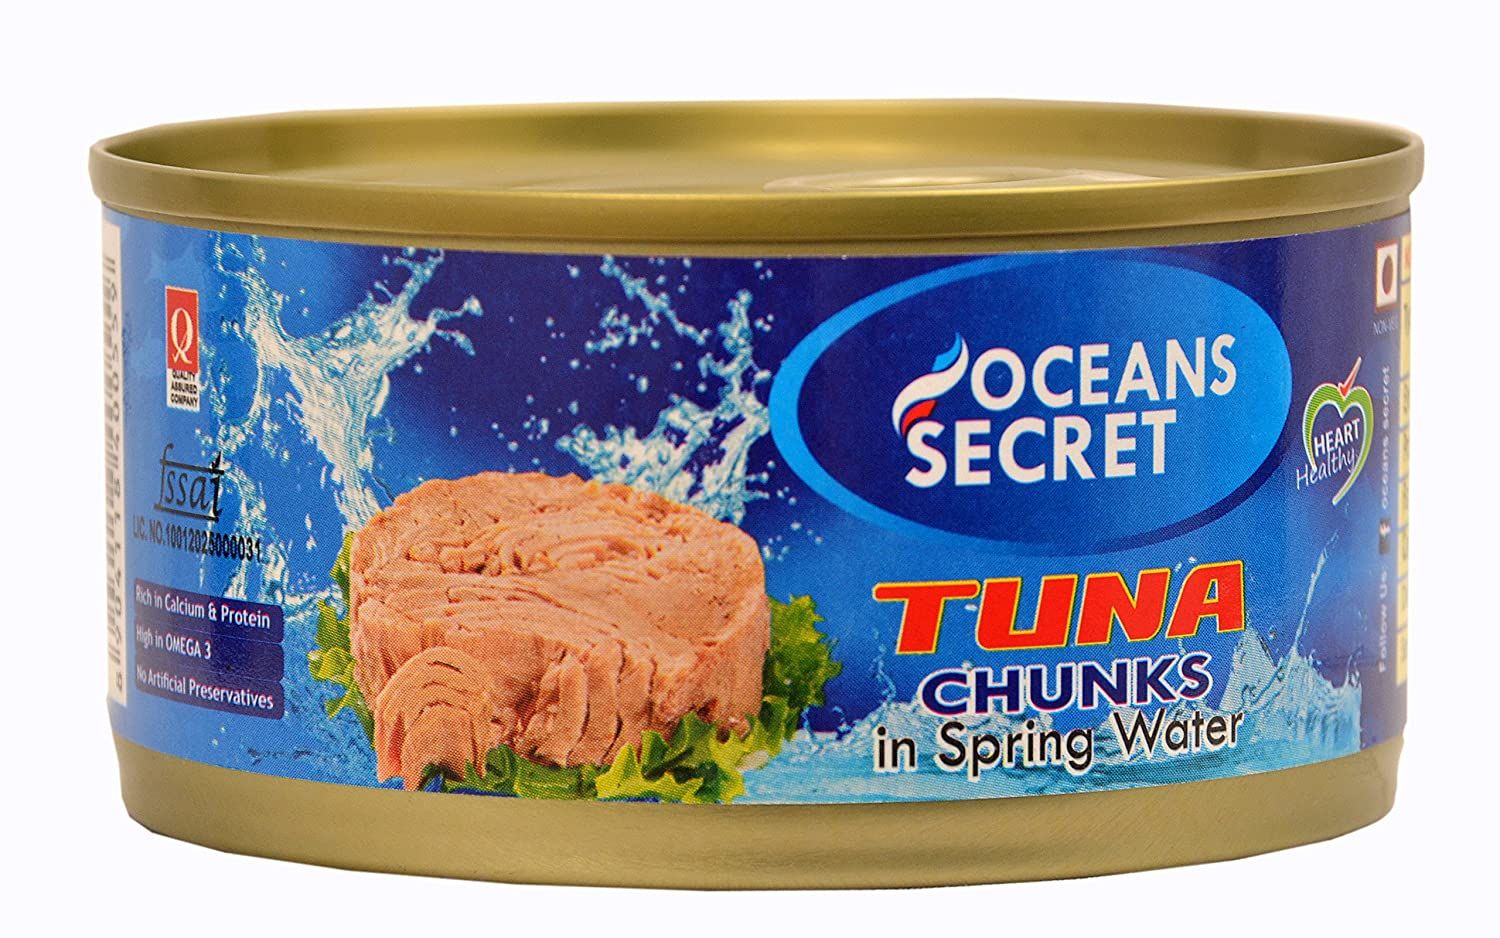 Ocean's Secret Canned Tuna Chunks In Spring Water Image